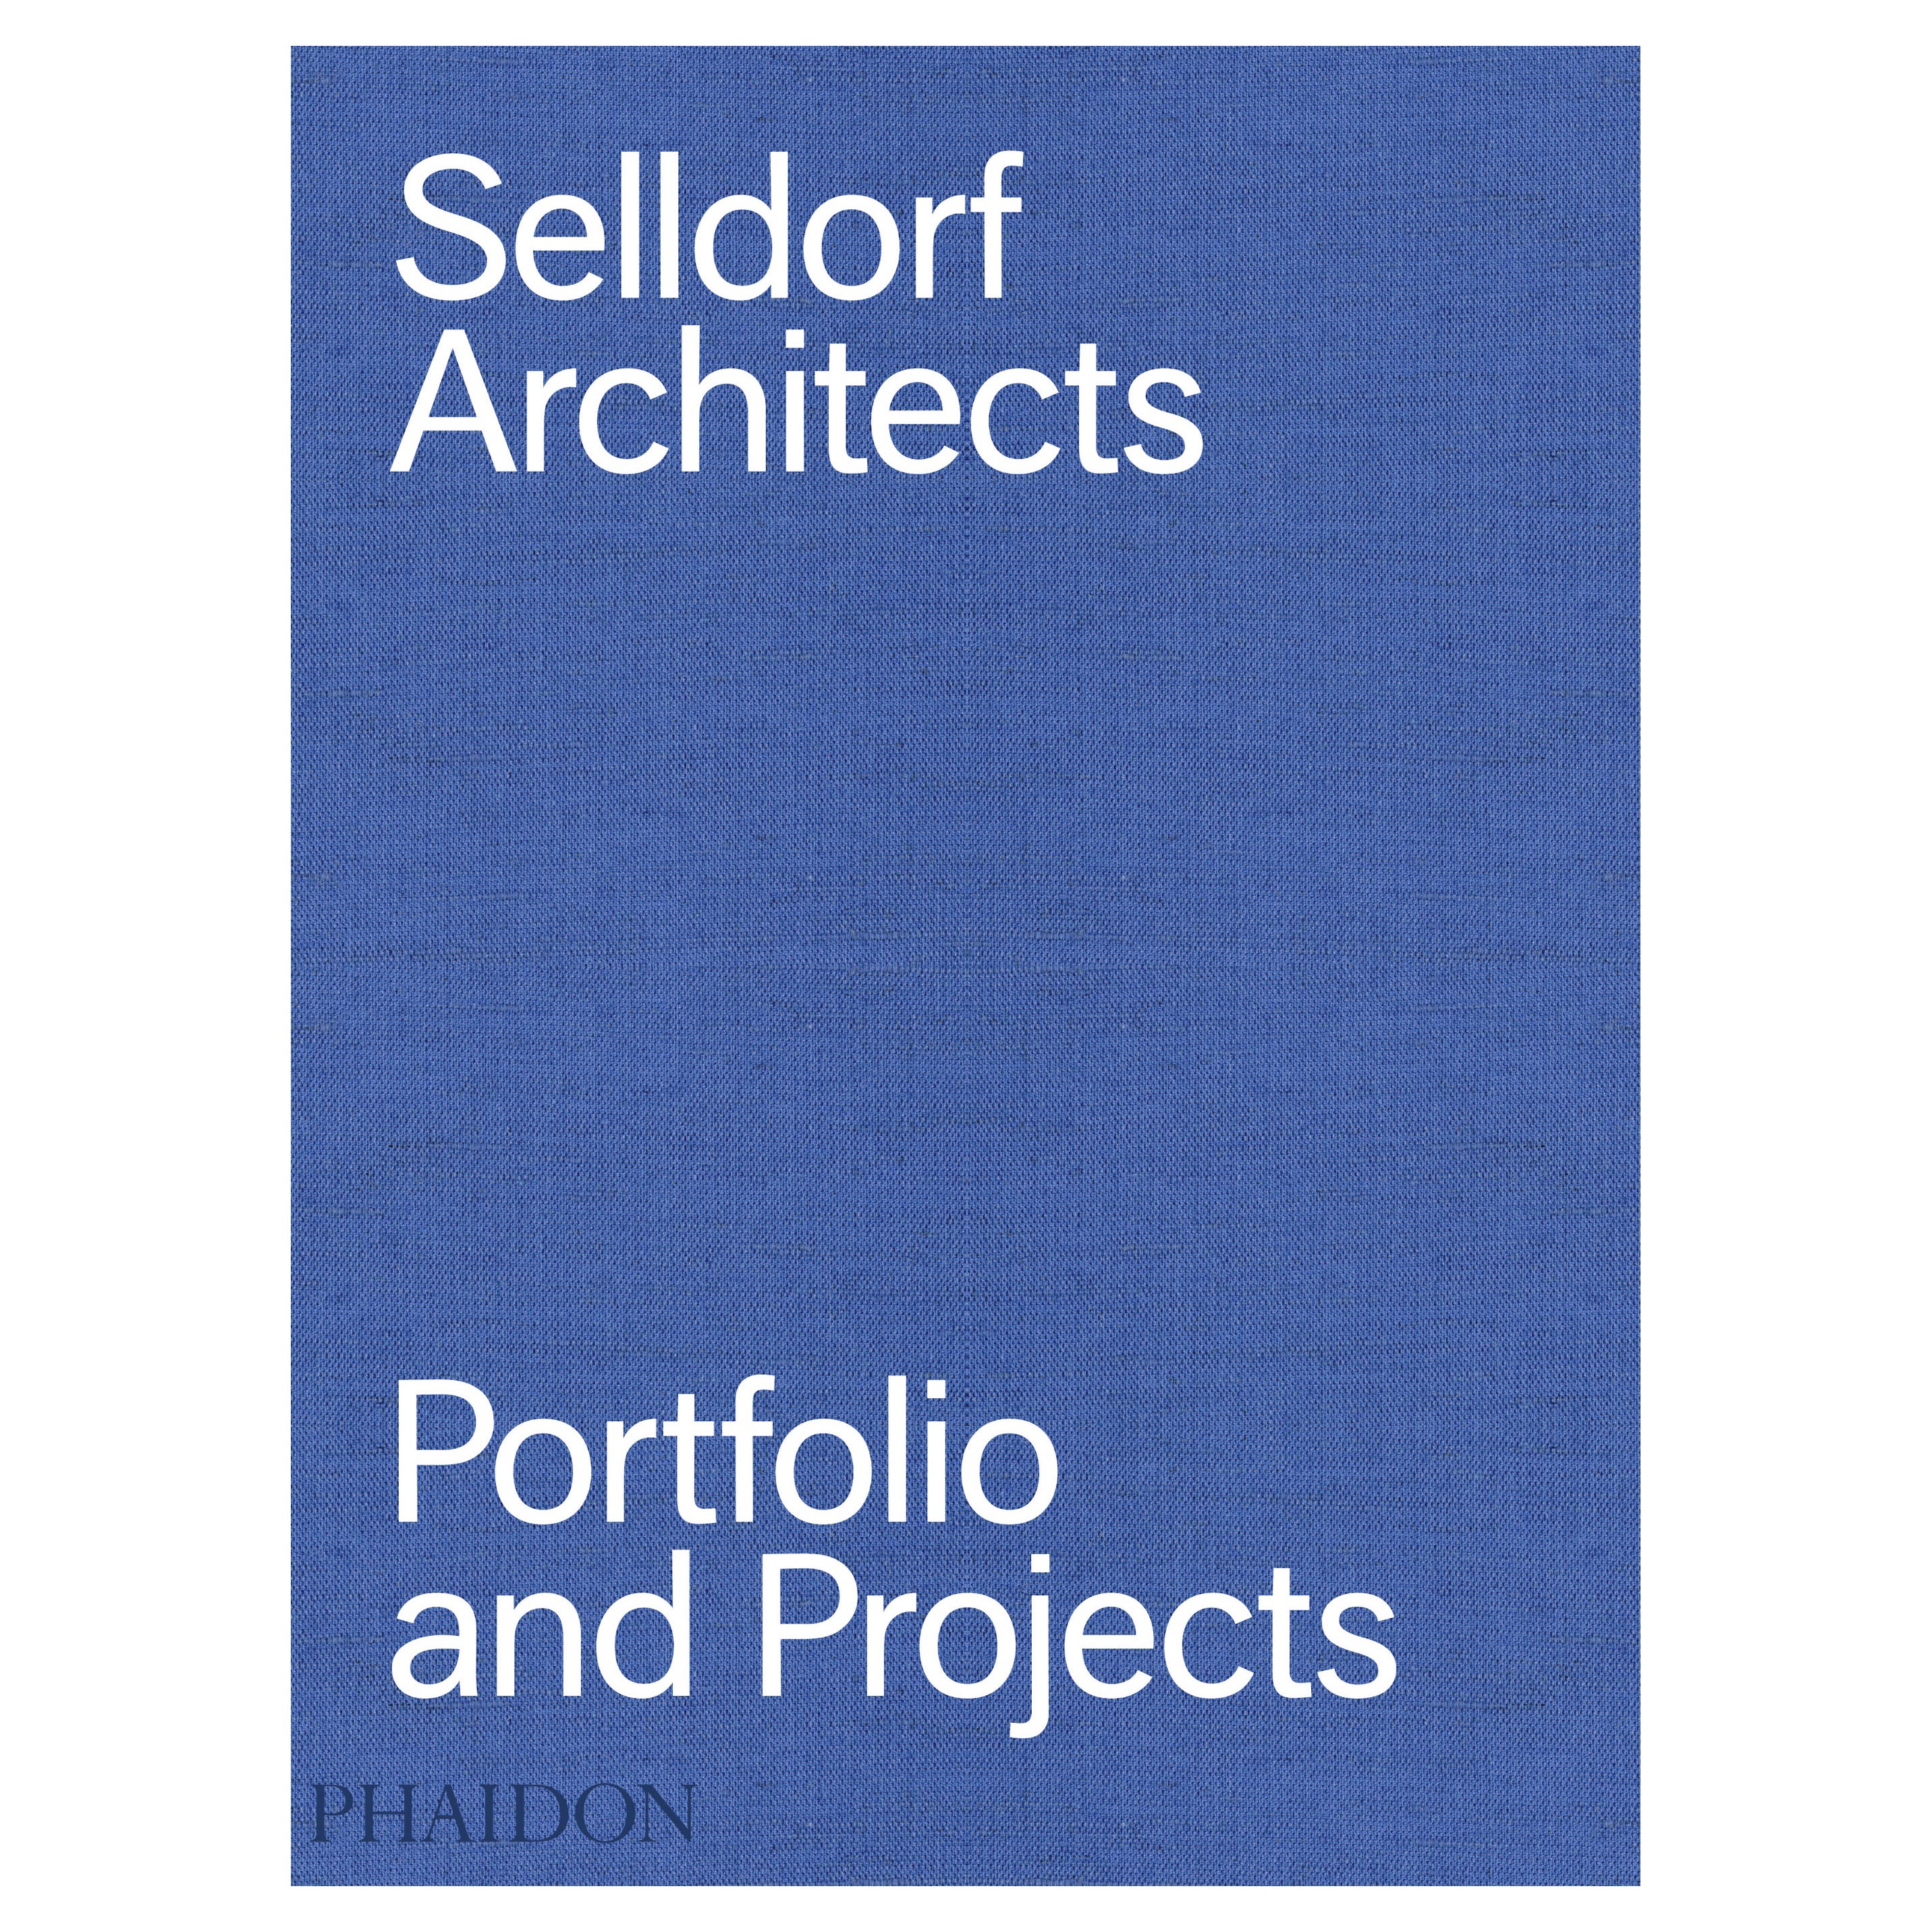 Selldorf Architects, Portfolio and Projects